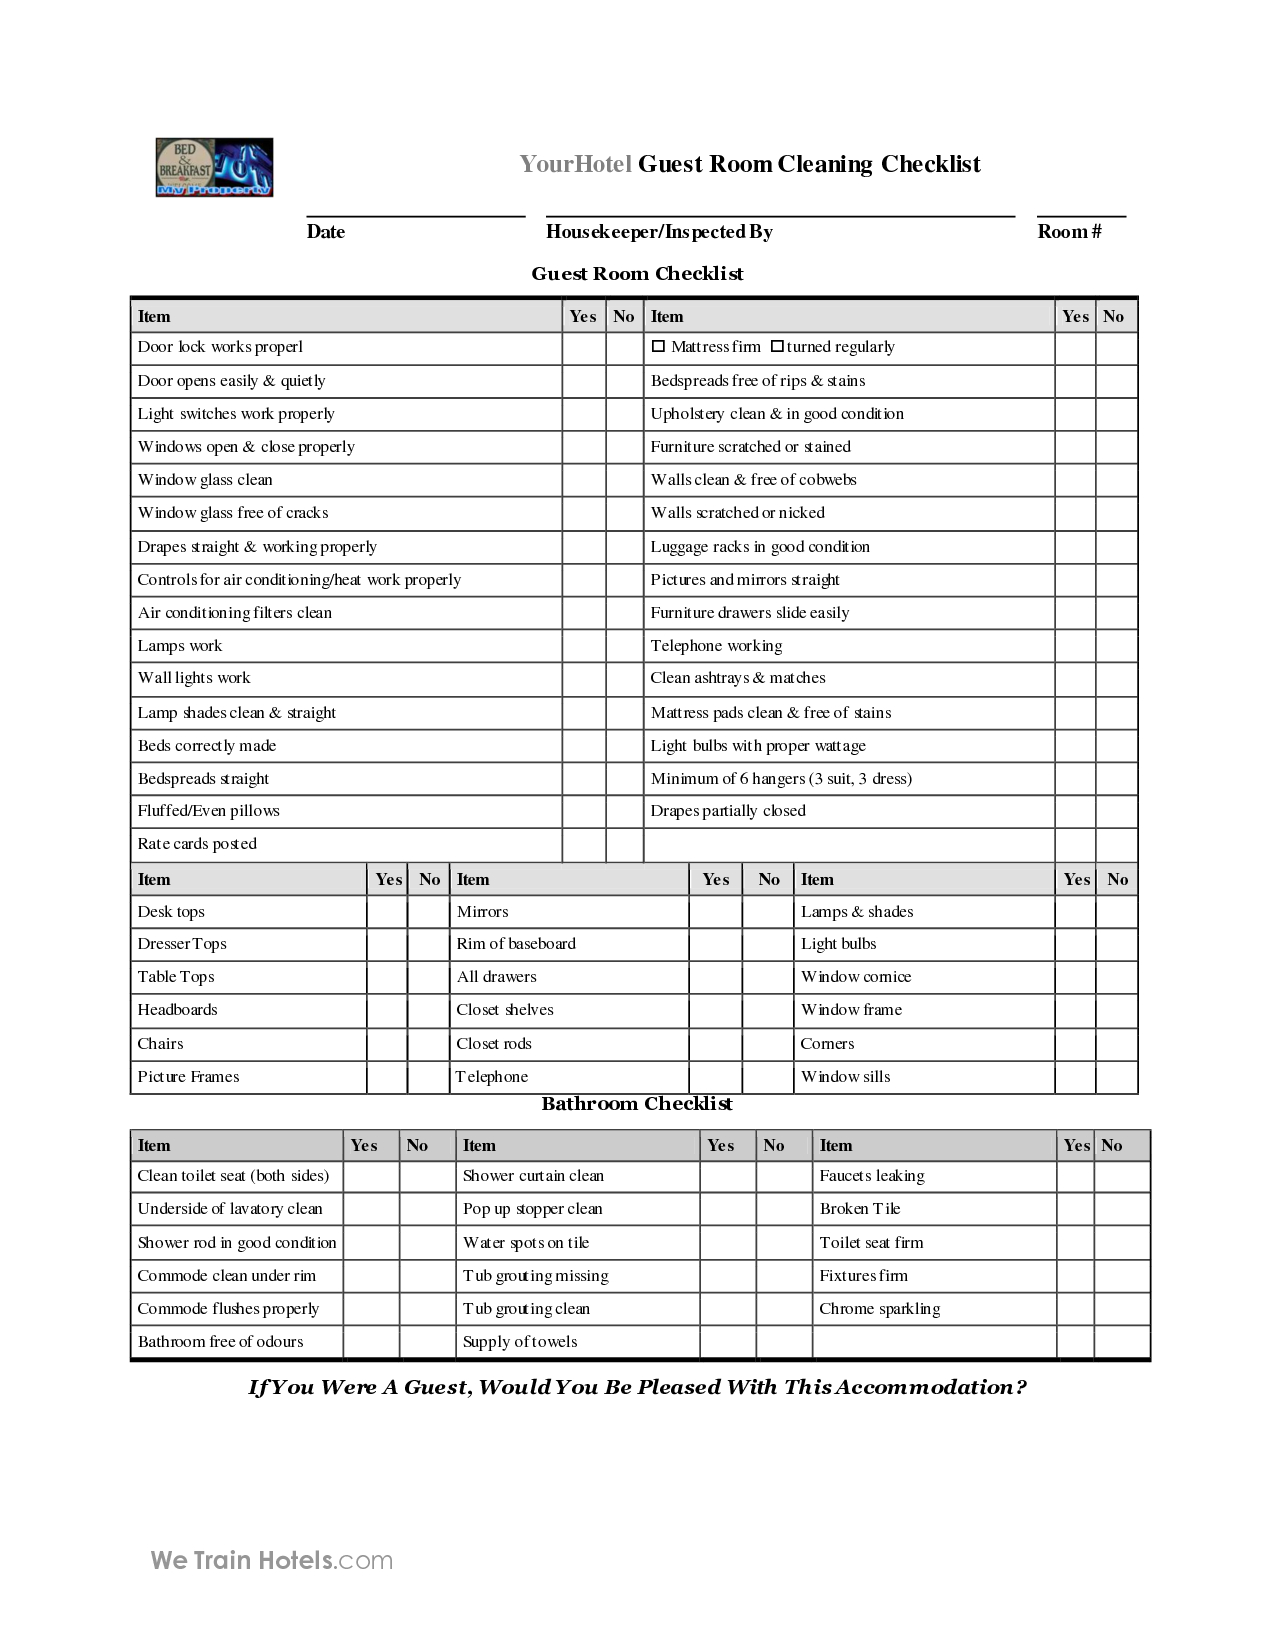 Blank+Cleaning+Checklist+Template | Apartment Checklist With Blank Cleaning Schedule Template